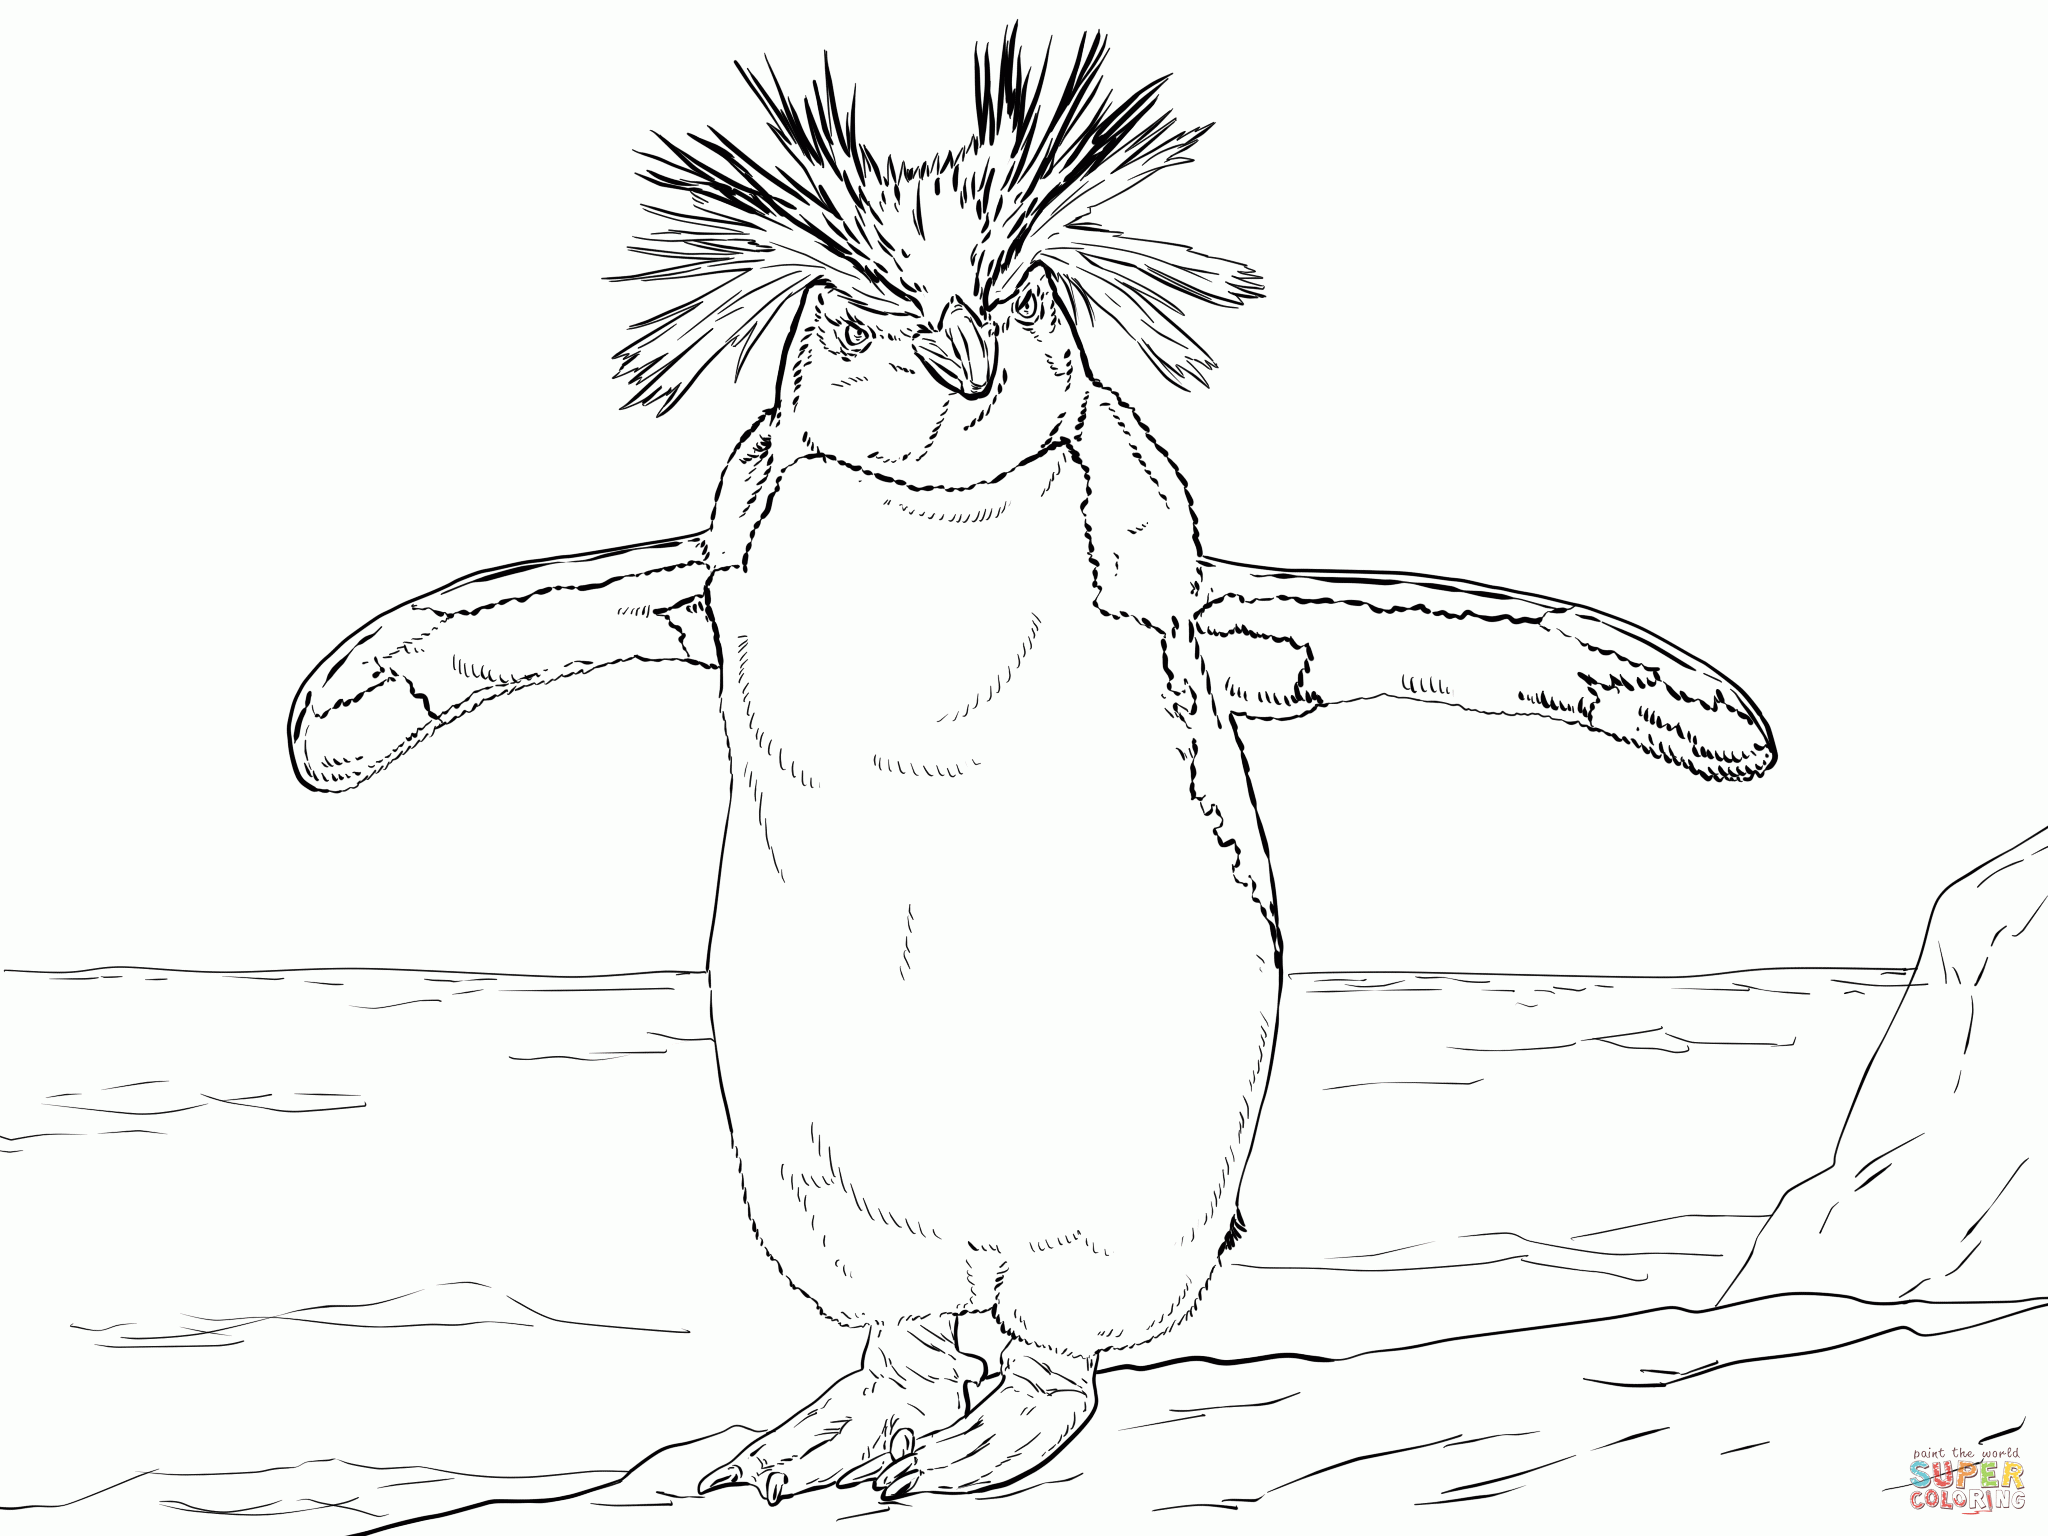 Penguin Coloring Page (19 Pictures) - Colorine.net | 24928